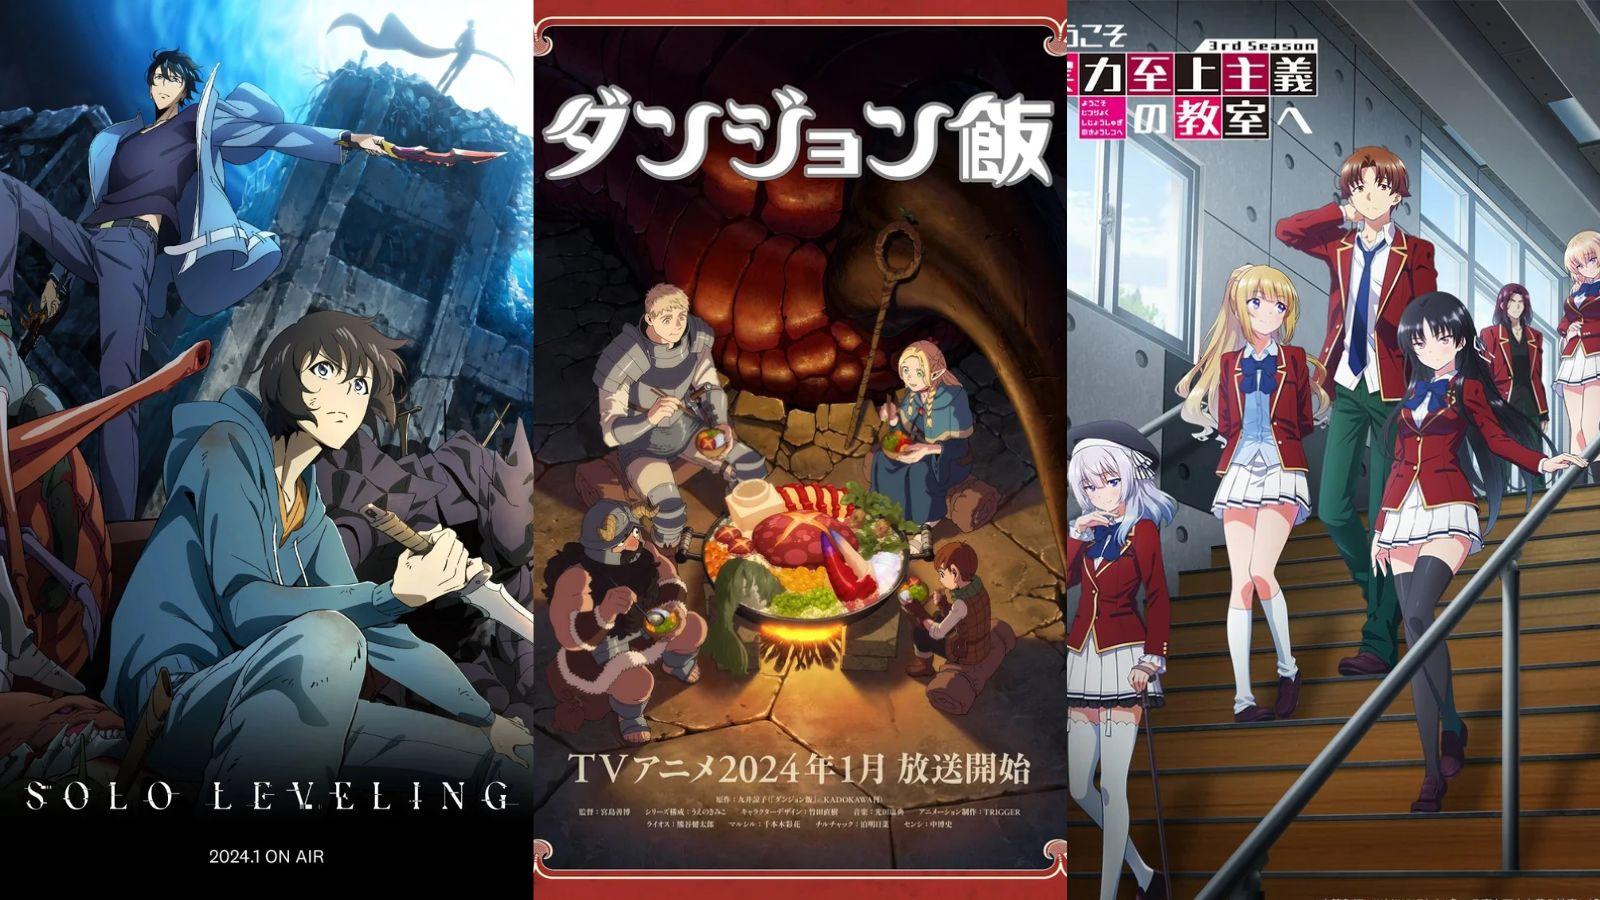 10 best romantic anime series to put on your watchlist today